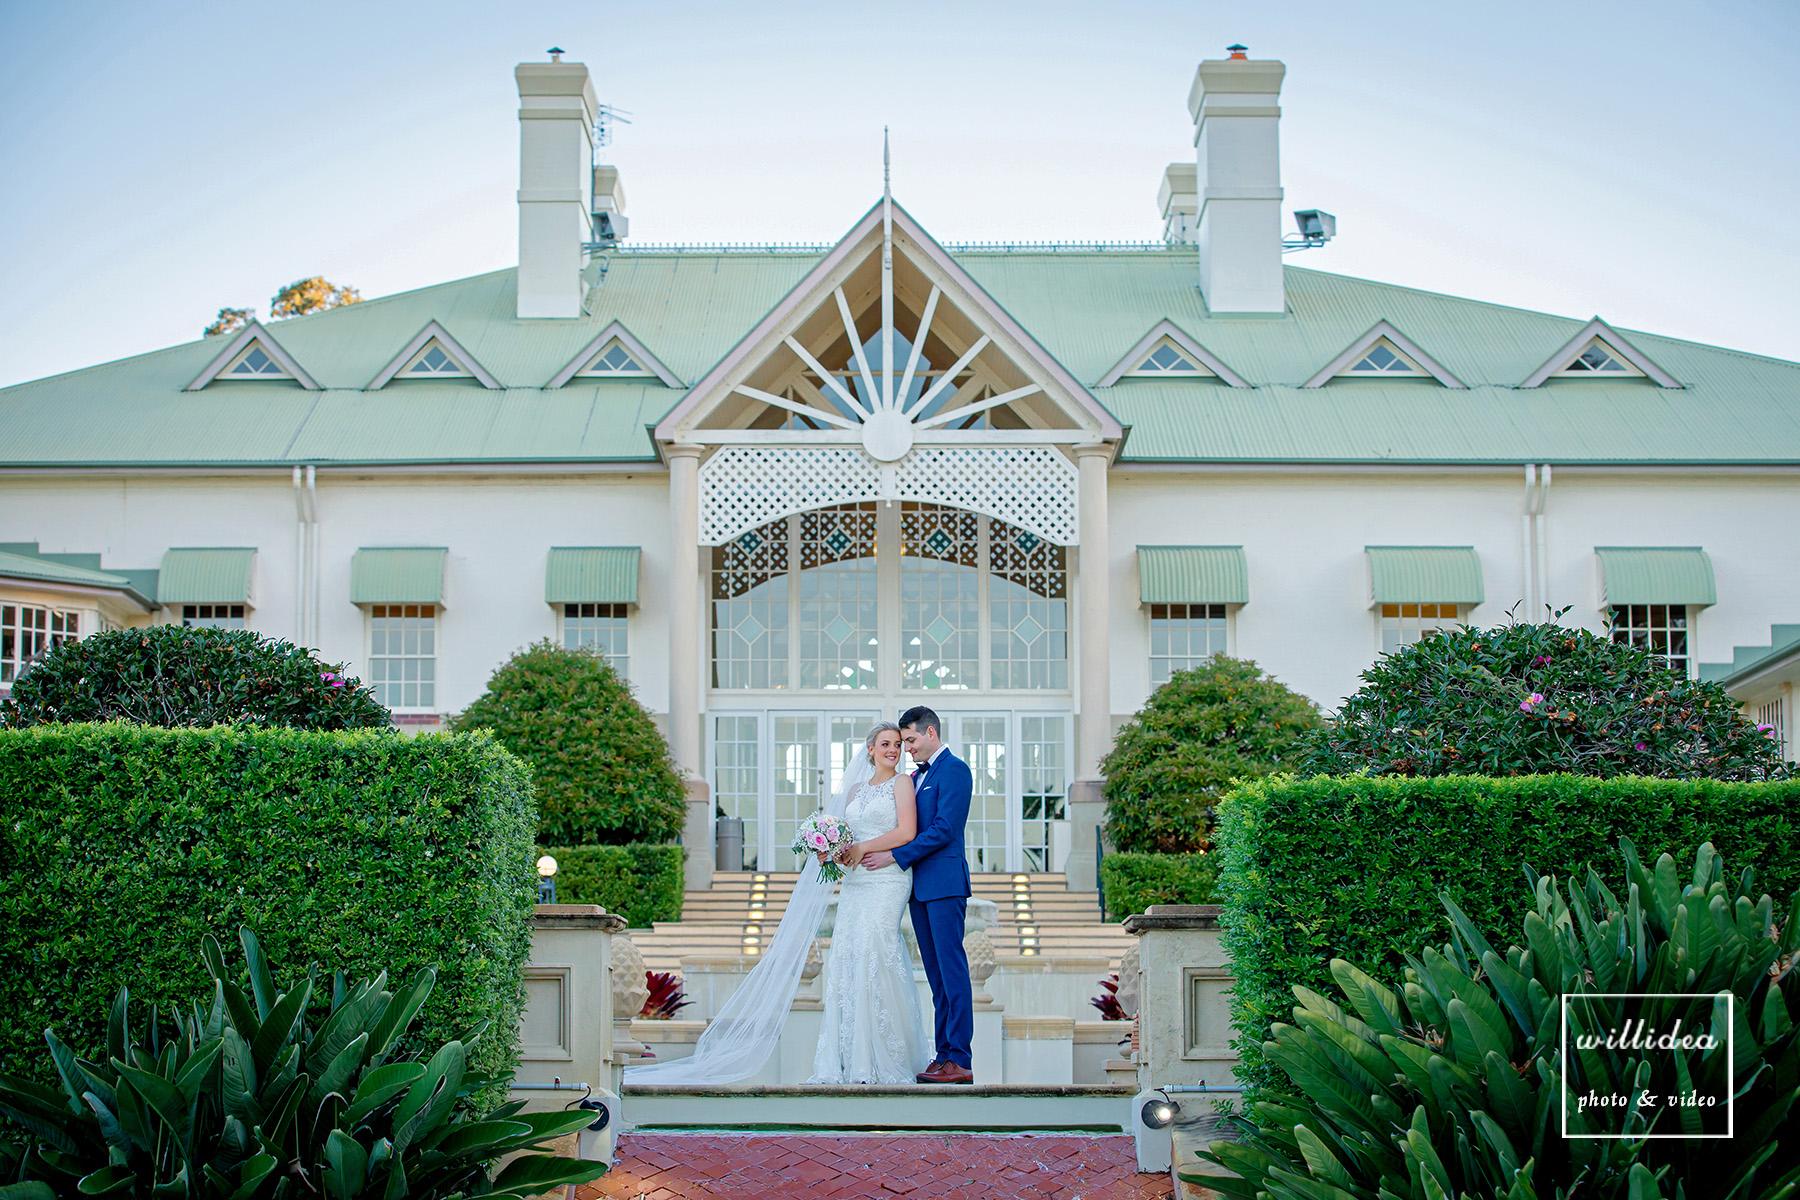 Experienced Wedding Photographer in Gold Coast